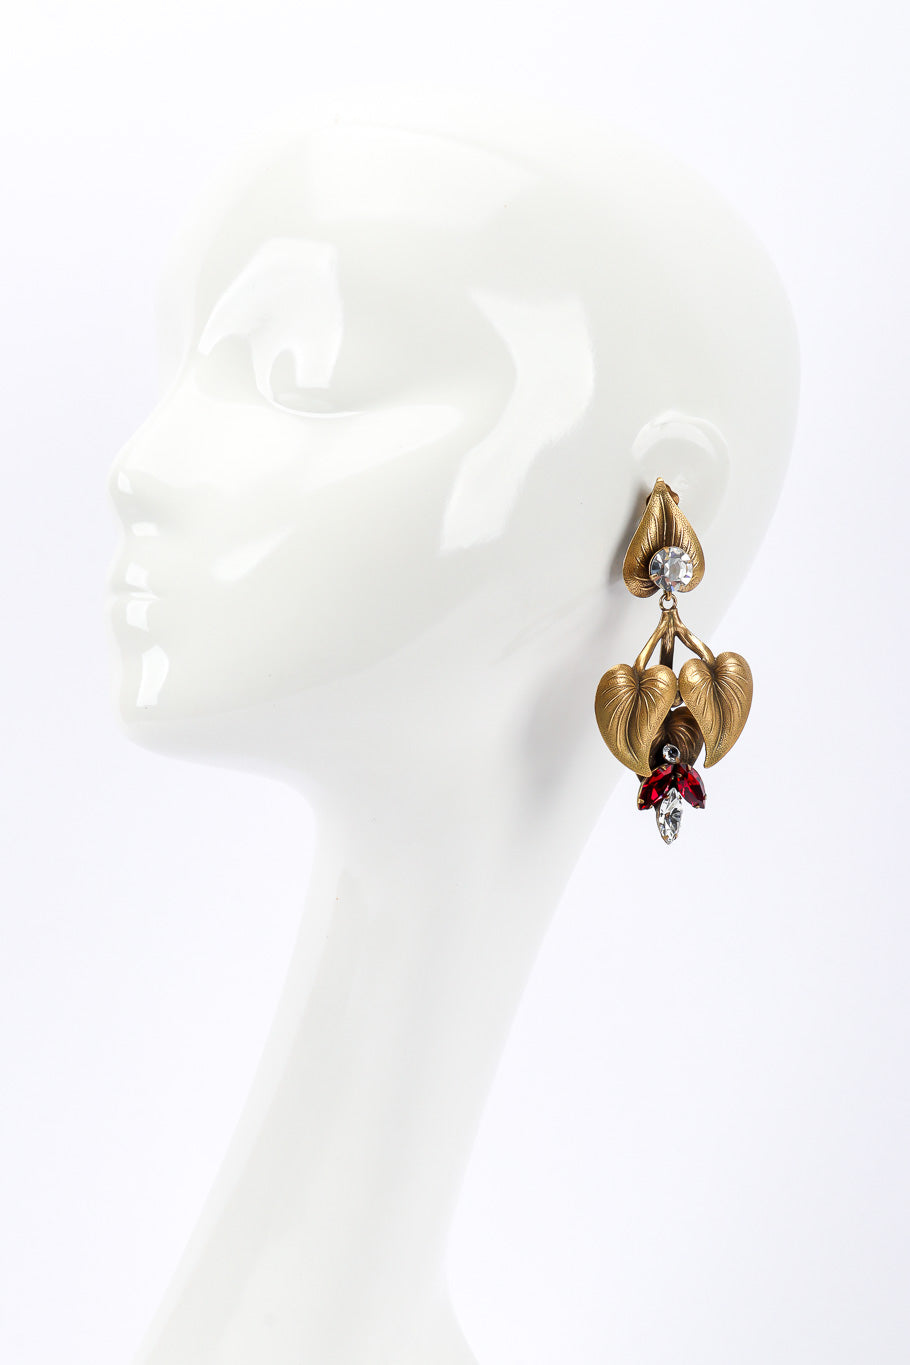 Leaf earrings by Joseff of Hollywood on white background on mannequin head @recessla